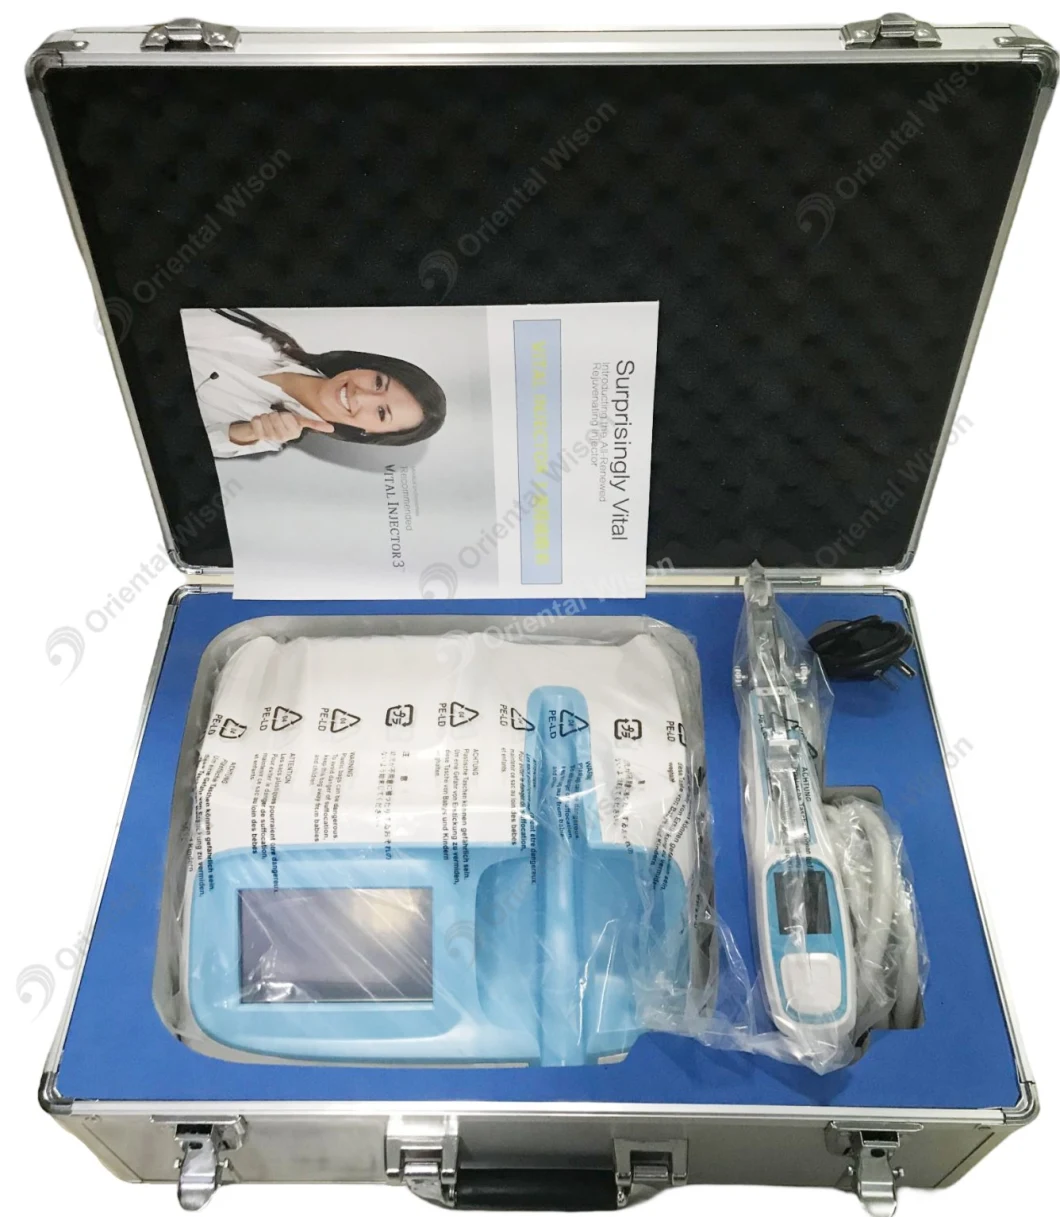 Water Mesotherapy Gun Vital Injector 3 for Prp Skin Whitening Beauty Device Christmas